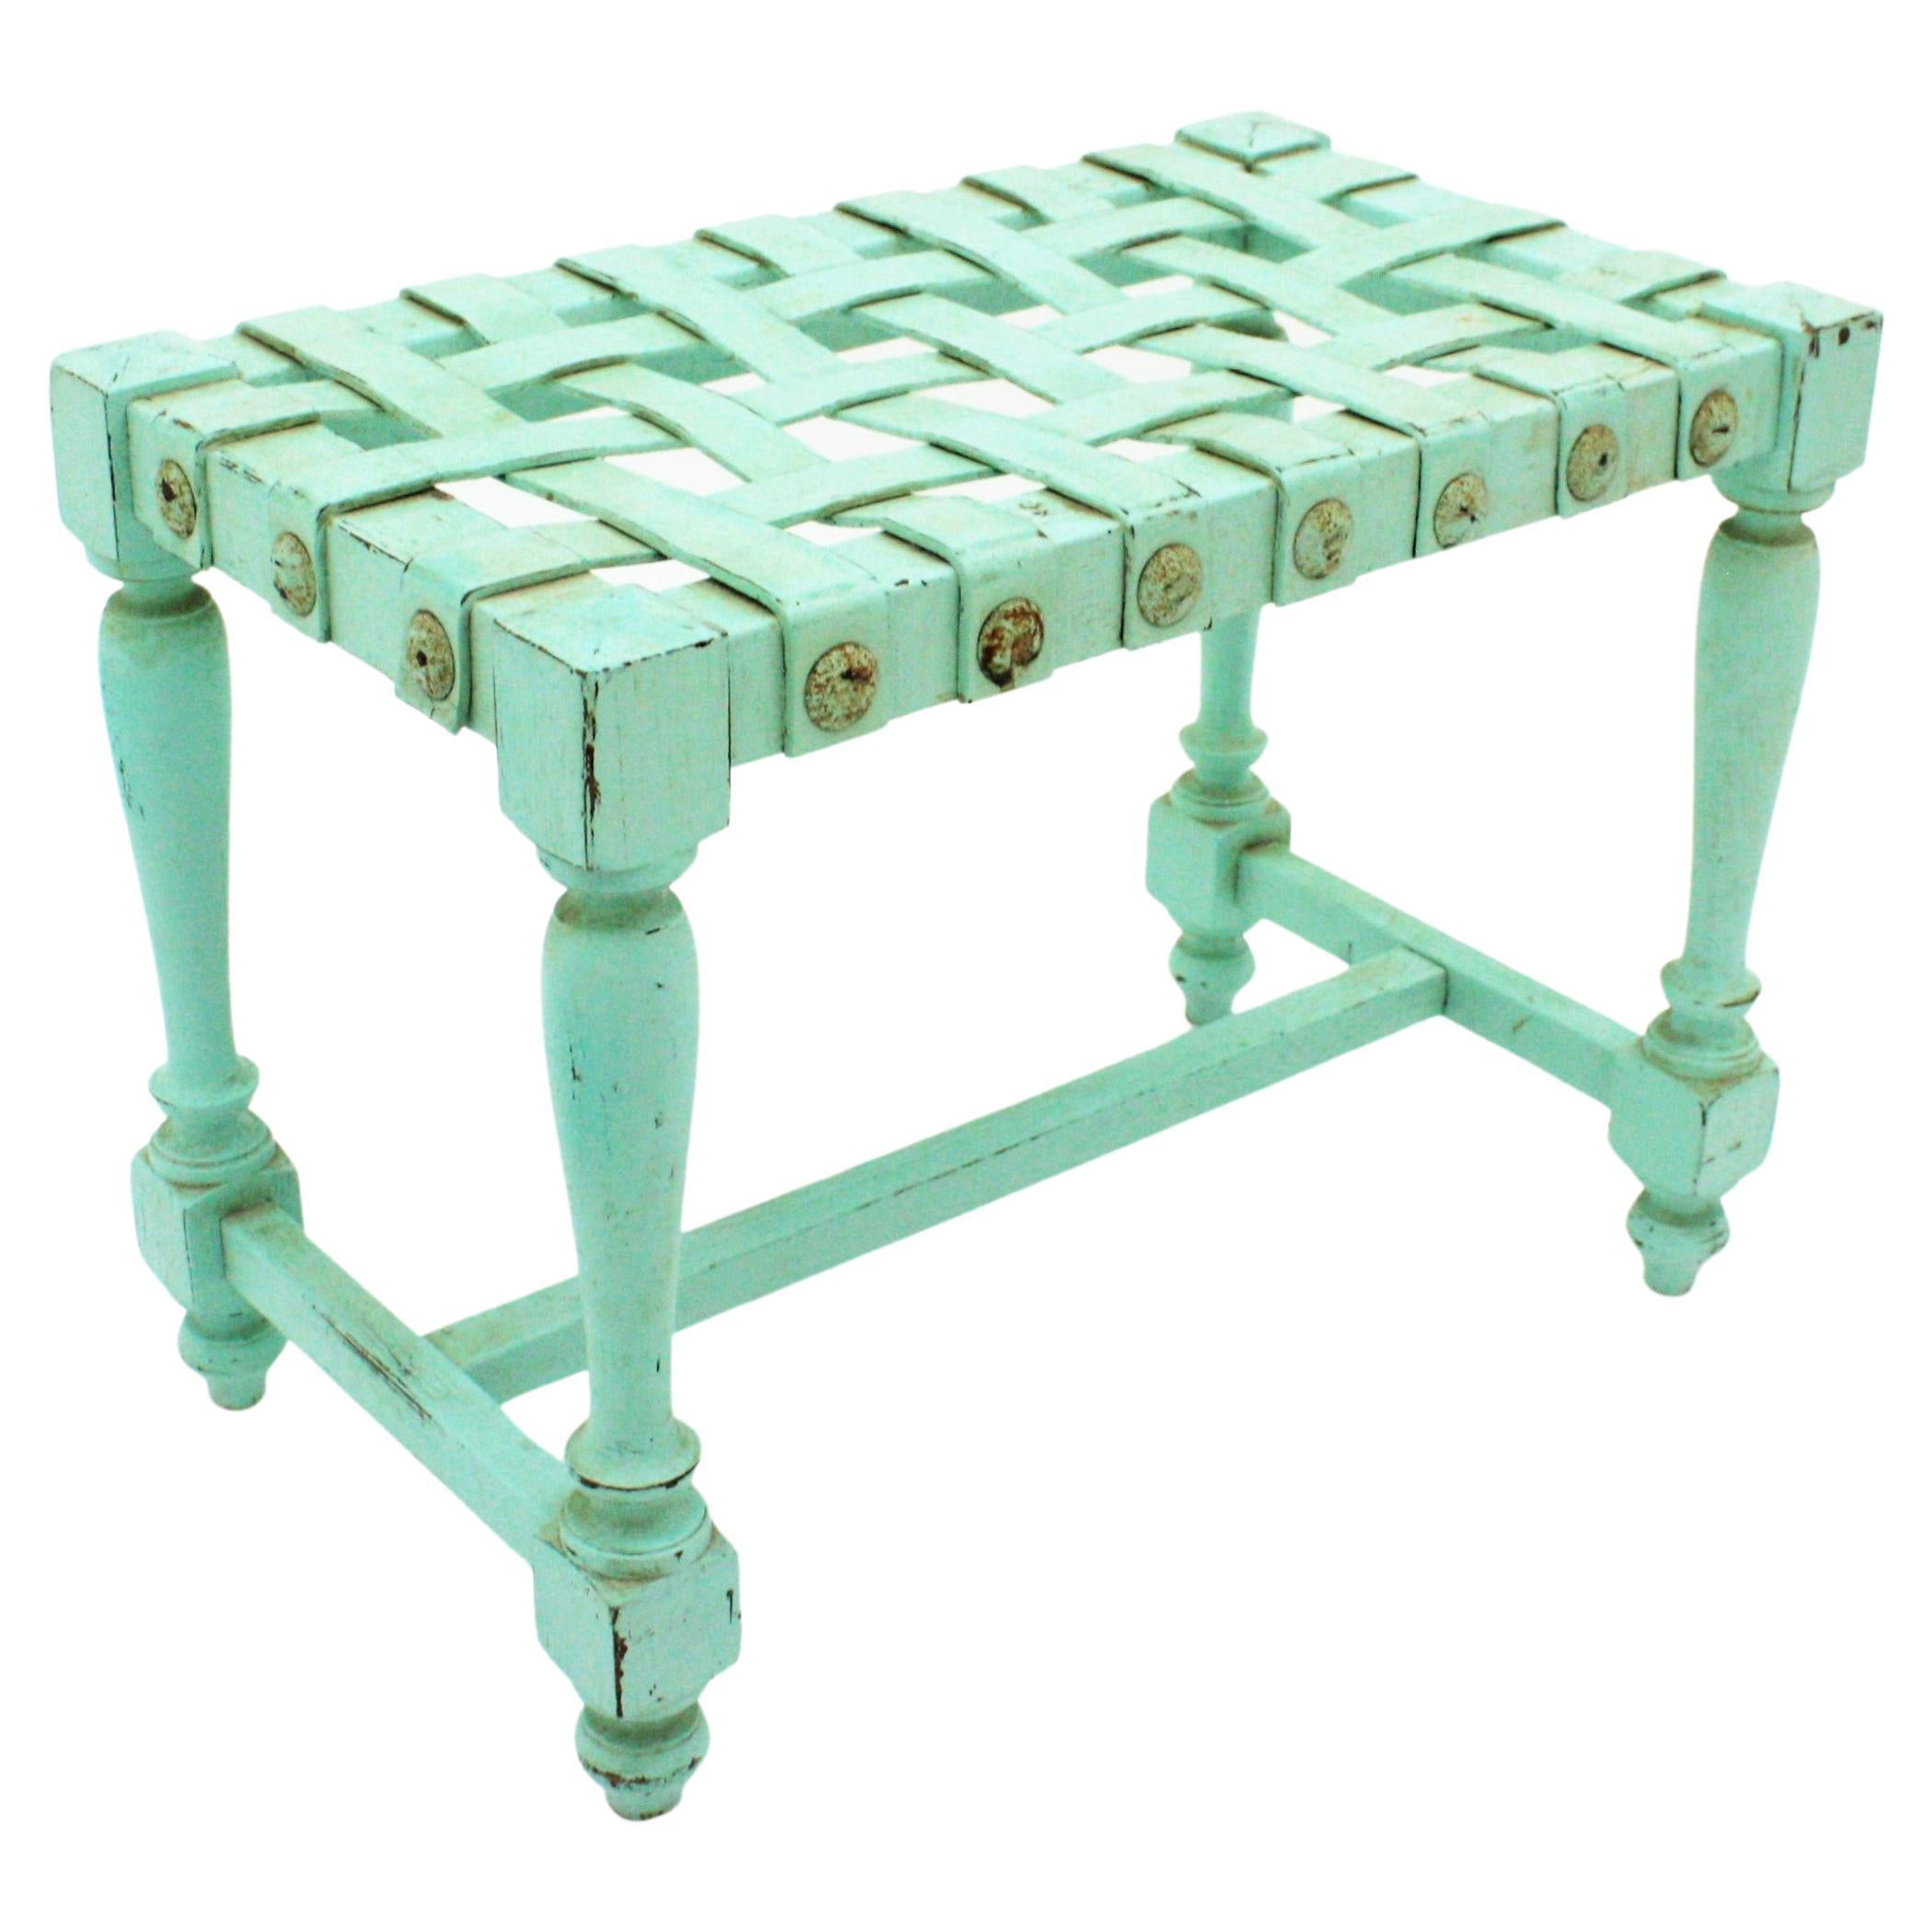 Spanish Stool in Turquoise Patinated Oak Wook with Woven Leather Seat For Sale